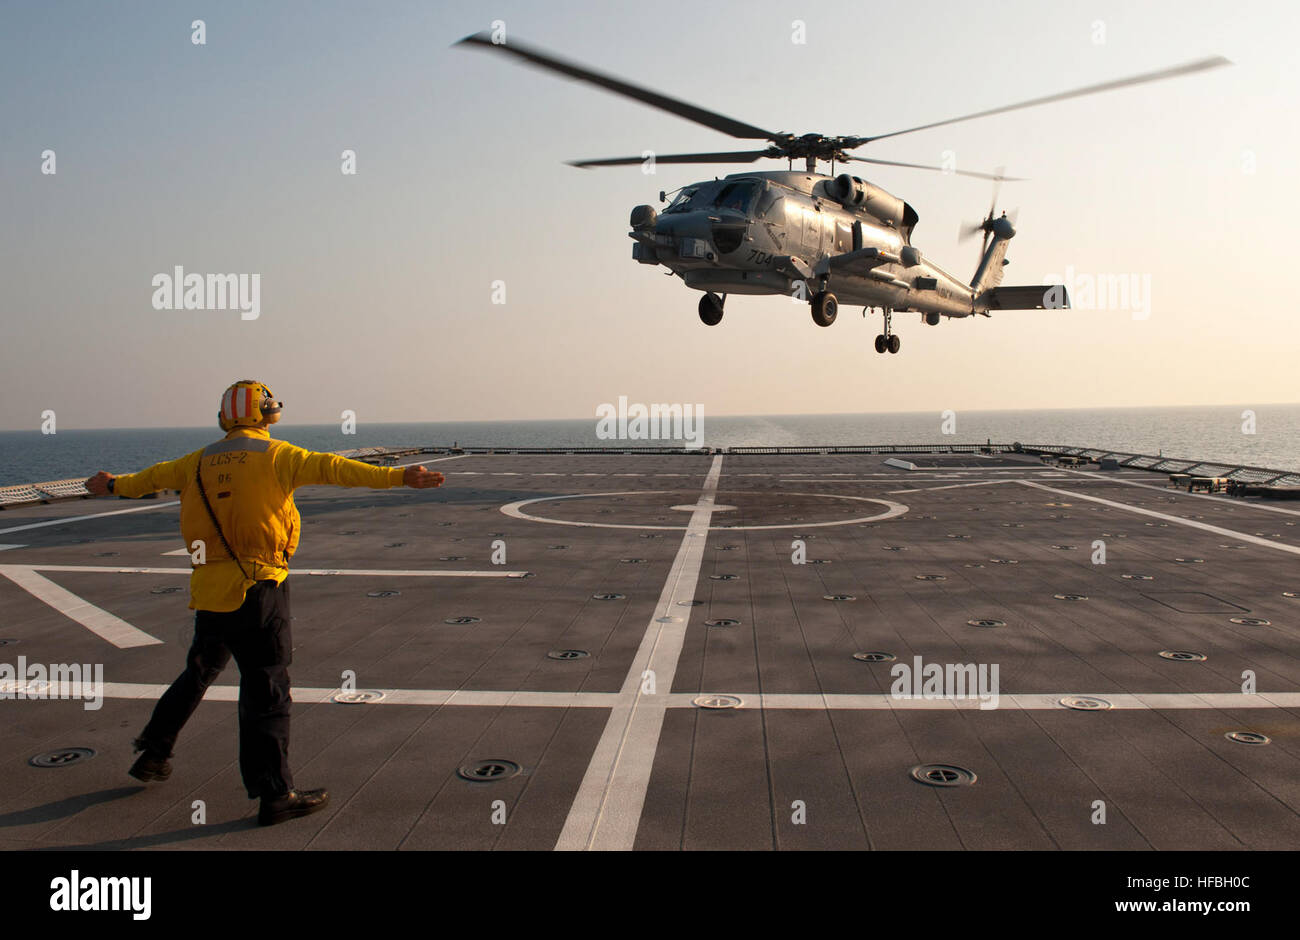 120409-N-ZS026-514 ATLANTIC OCEAN (April 9, 2012) Boatswain’s Mate 3rd Class Robert Chittenden signals for an MH-60R Sea Hawk helicopter assigned to the Swamp Foxes of Helicopter Maritime Strike Squadron (HSM) 74 to take off from the flight deck of the littoral combat ship USS Independence (LCS 2). Sailors from Independence's Gold crew and embarked Mine Countermeasures Detachment 1 are underway for the ship's transit to San Diego after successfully completing testing on the mine countermeasures mission package. (U.S. Navy photo by Mass Communication Specialist 2nd Class Trevor Welsh/Released)  Stock Photo